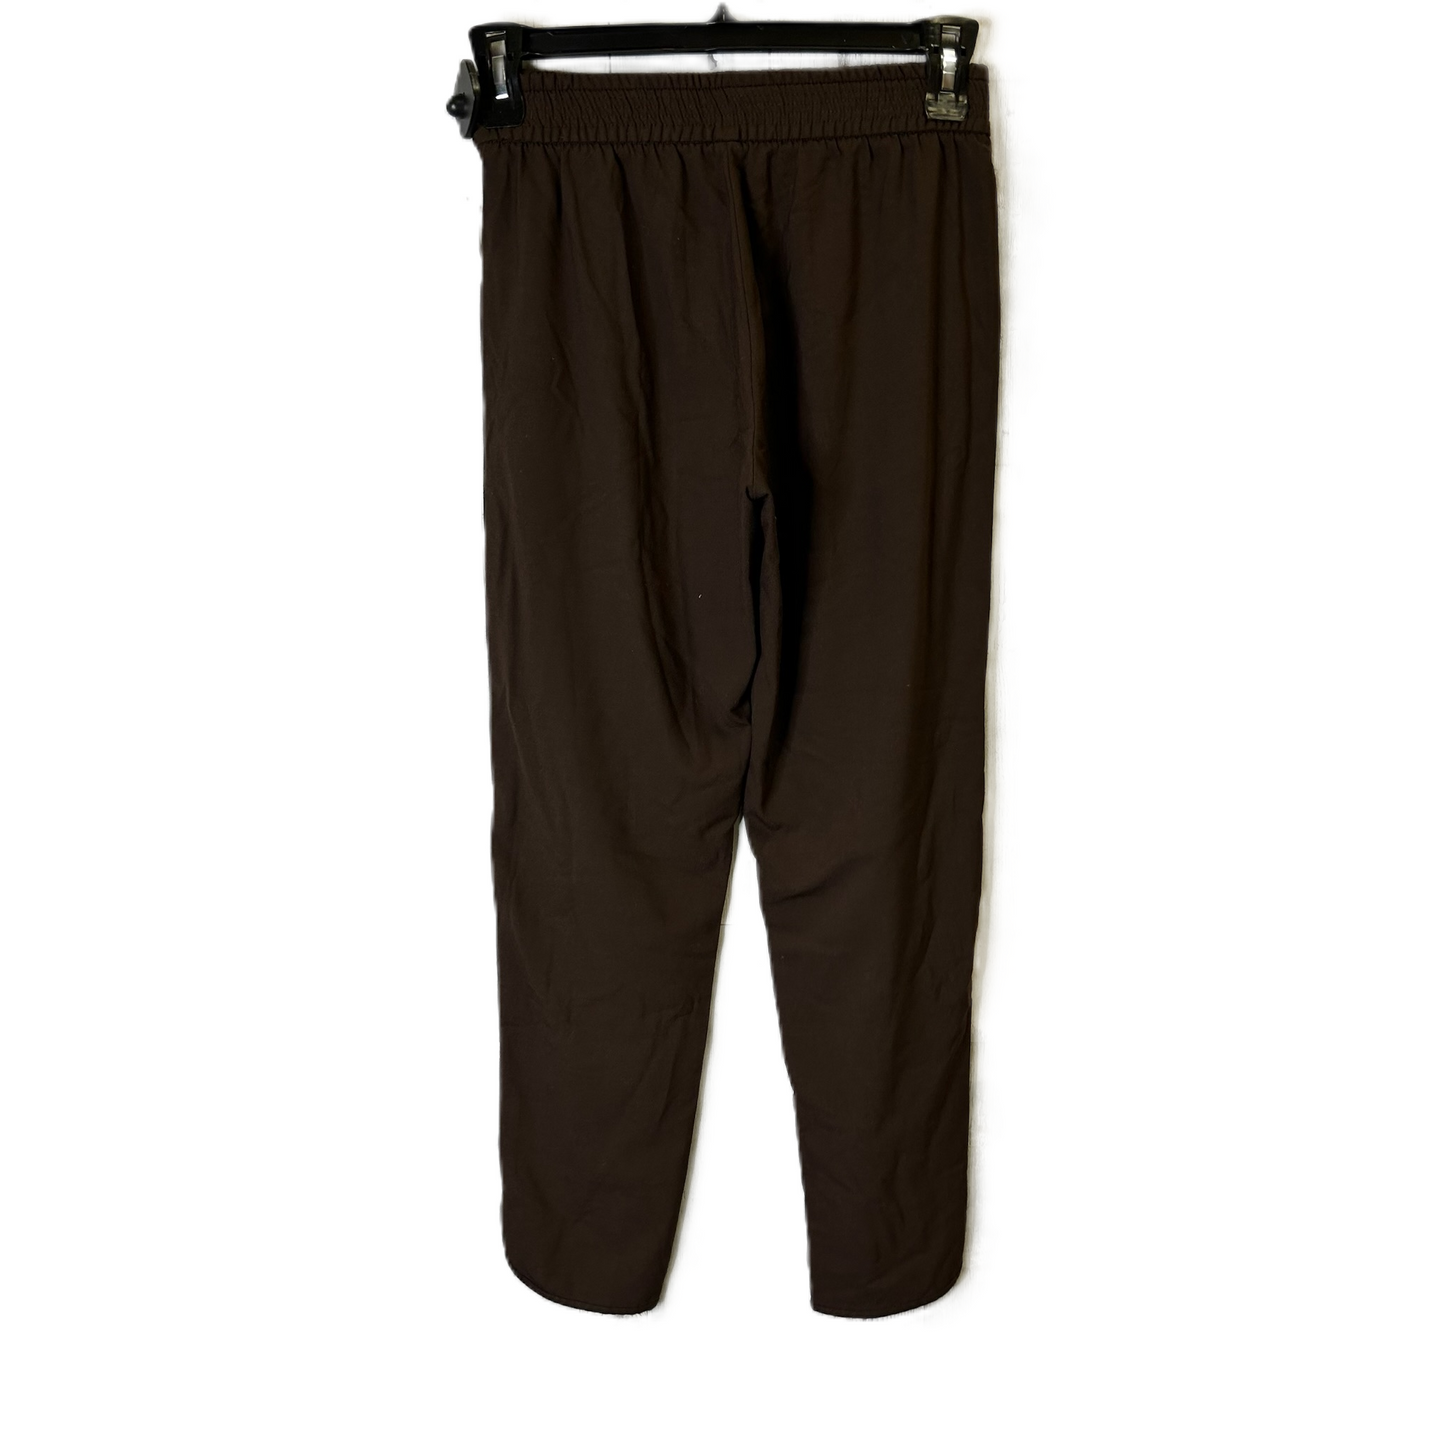 Brown Pants Other By Zara, Size: Xs